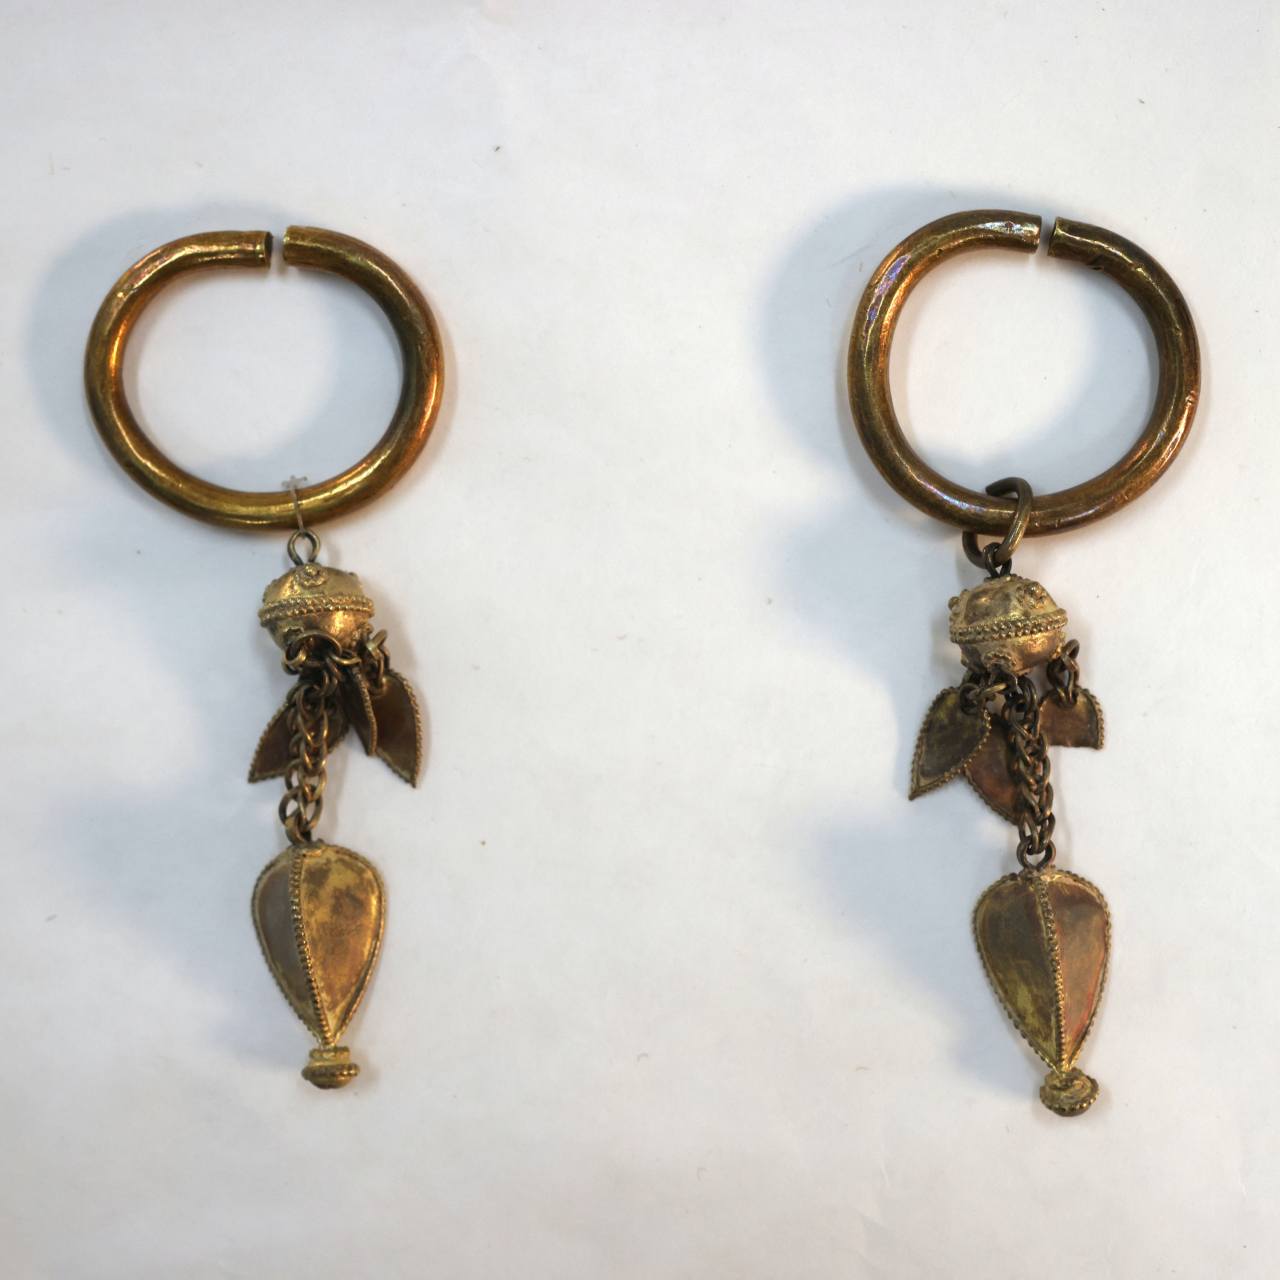 A pair of earrings excavated from a Jangsu Gaya tomb is photographed with special permission at the National Museum in Jeonju, in Jeonju, North Jeolla Province.Photo © Hyungwon Kang